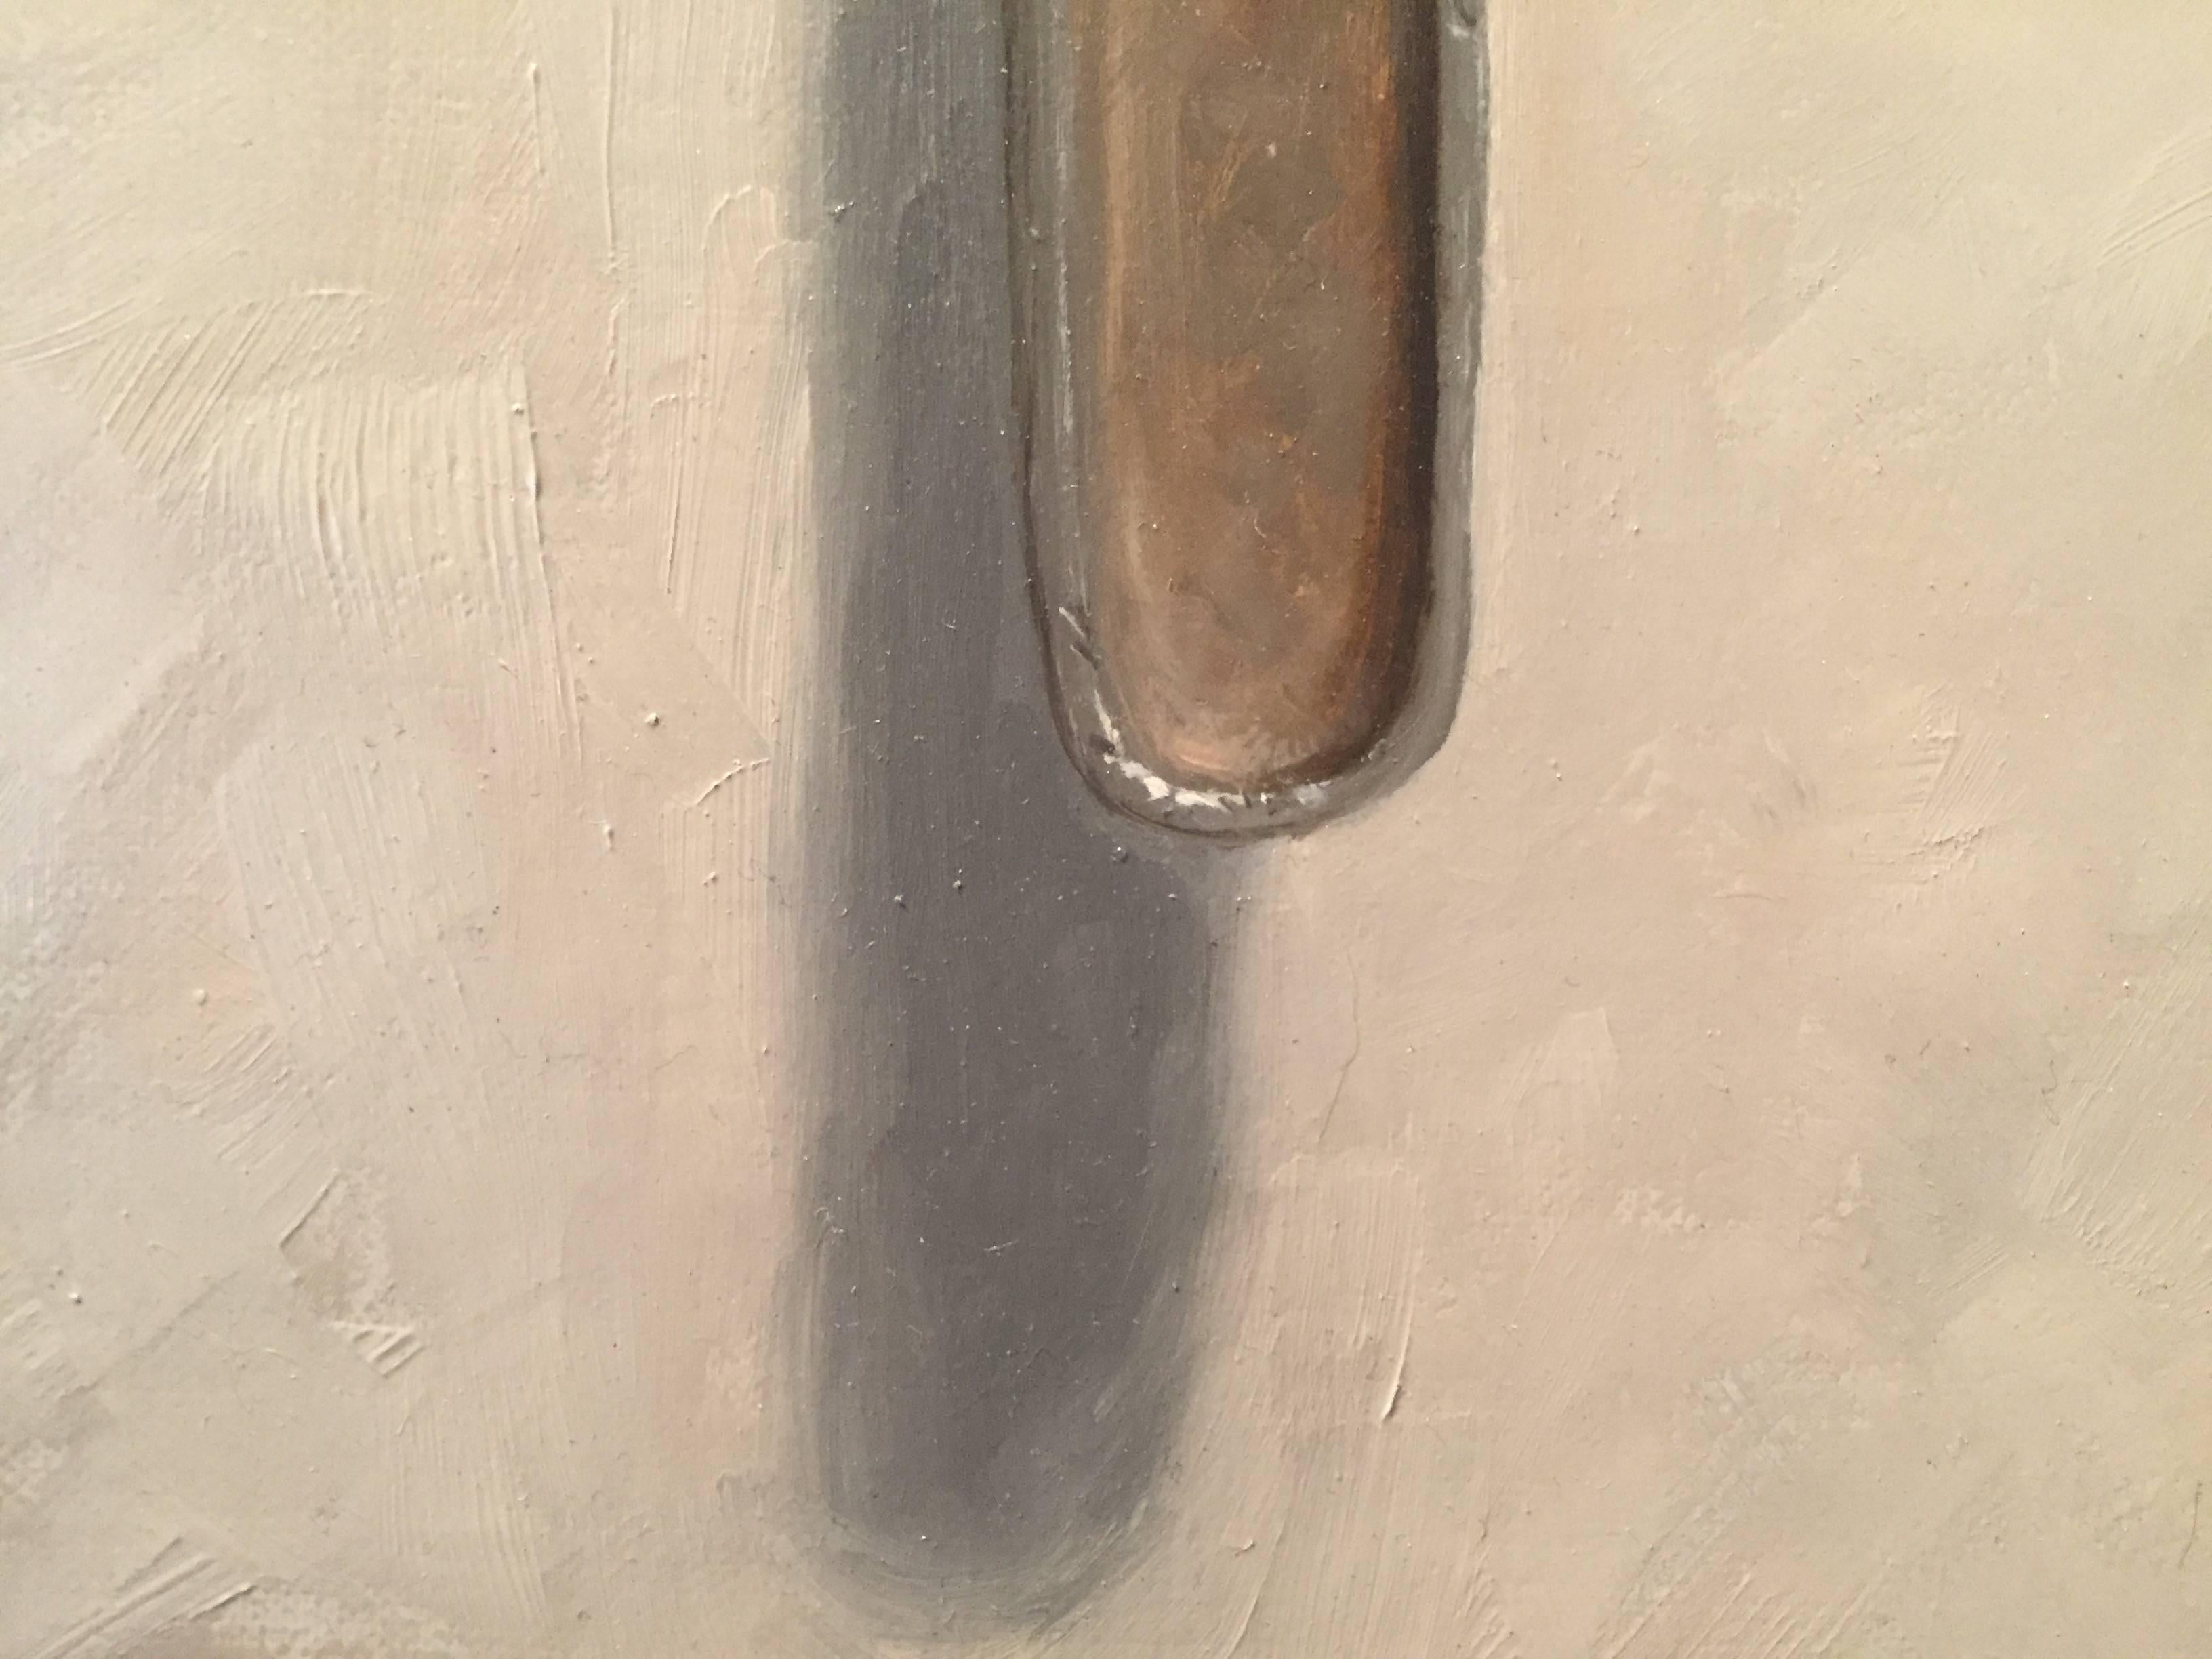 Painted from life, a workers tool. Hanging from a tiny metal nail, this heavy wrench looks as though one could reach out and grab it! Trompe L'Oeil is the expression; the literal definition is to 